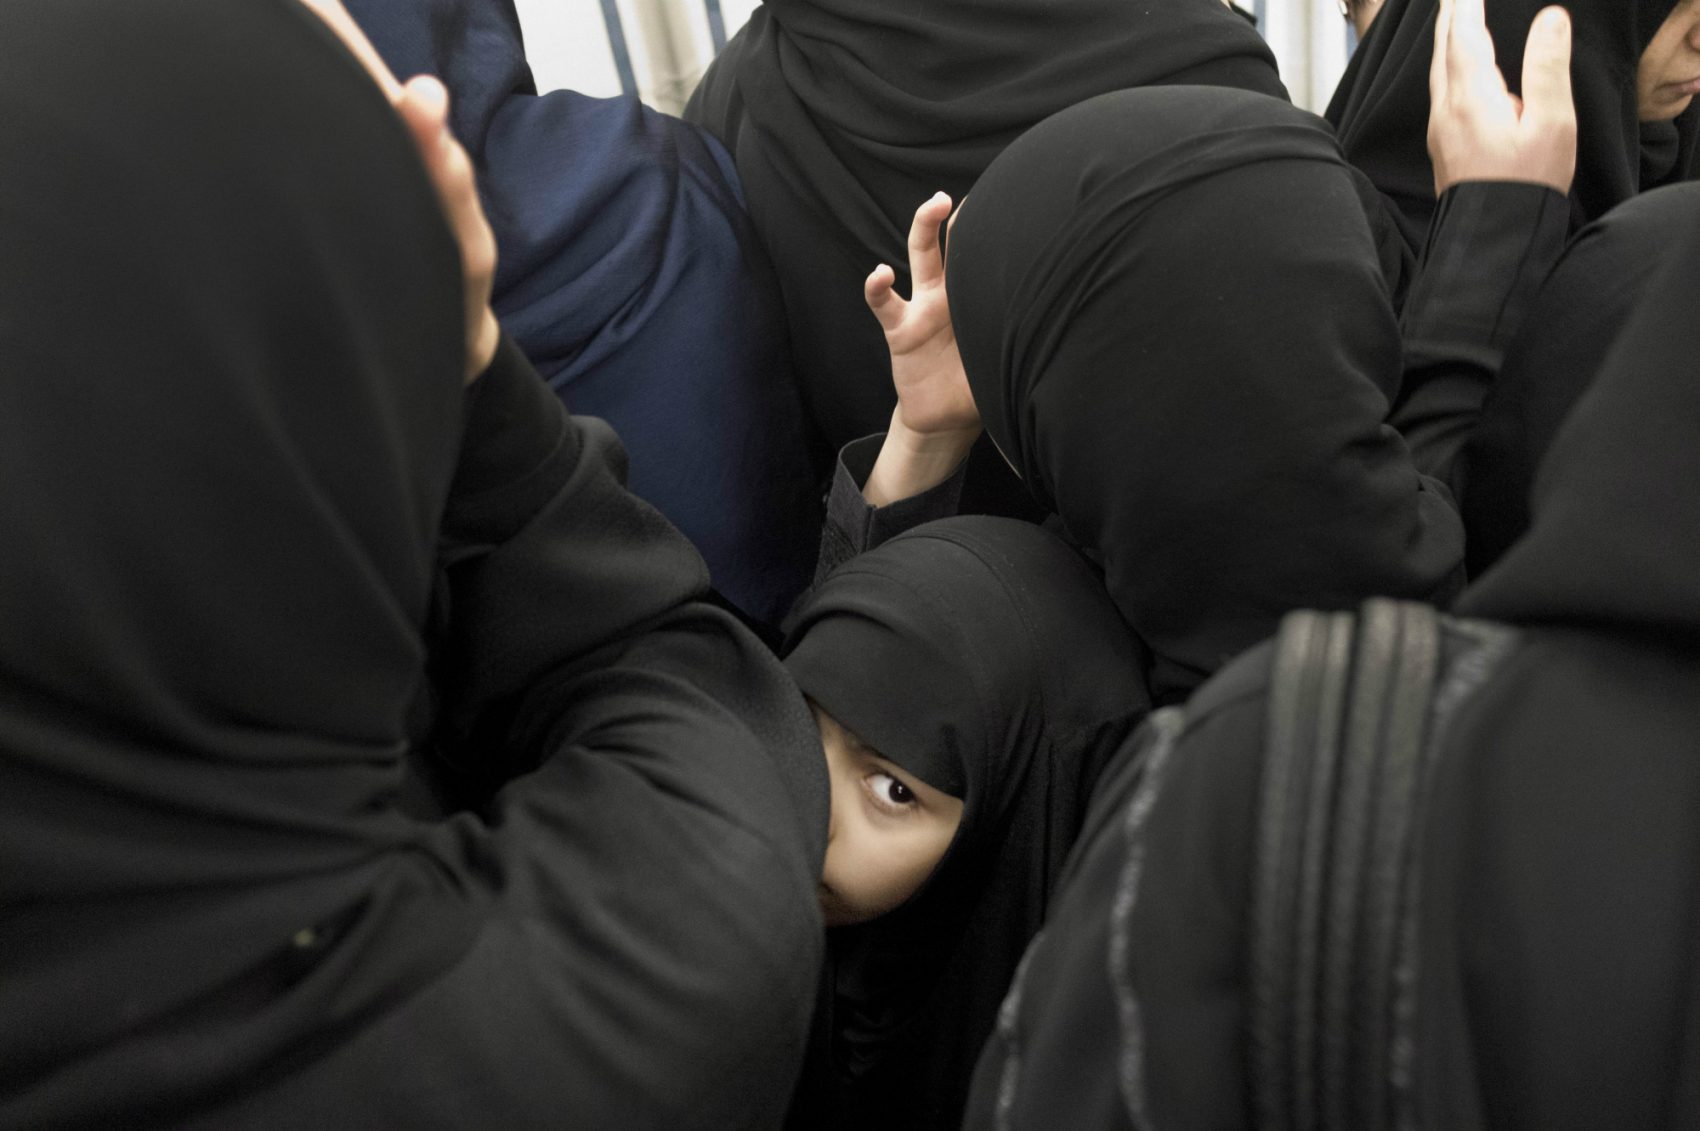 It takes a certain amount of hubris, writes Zouhair Mazouz, to frame the religious issues of the Middle East through the lens of America’s culture wars.
Pictured: A Saudi girl gets caught in the crowd of women visiting Al-Masjid an-Nabawi or Prophet Muhammad's Mosque, which situates Muhammad's tomb, in Medina, Saudi Arabia, September 15, 2016. (Nariman El-Mofty/AP)